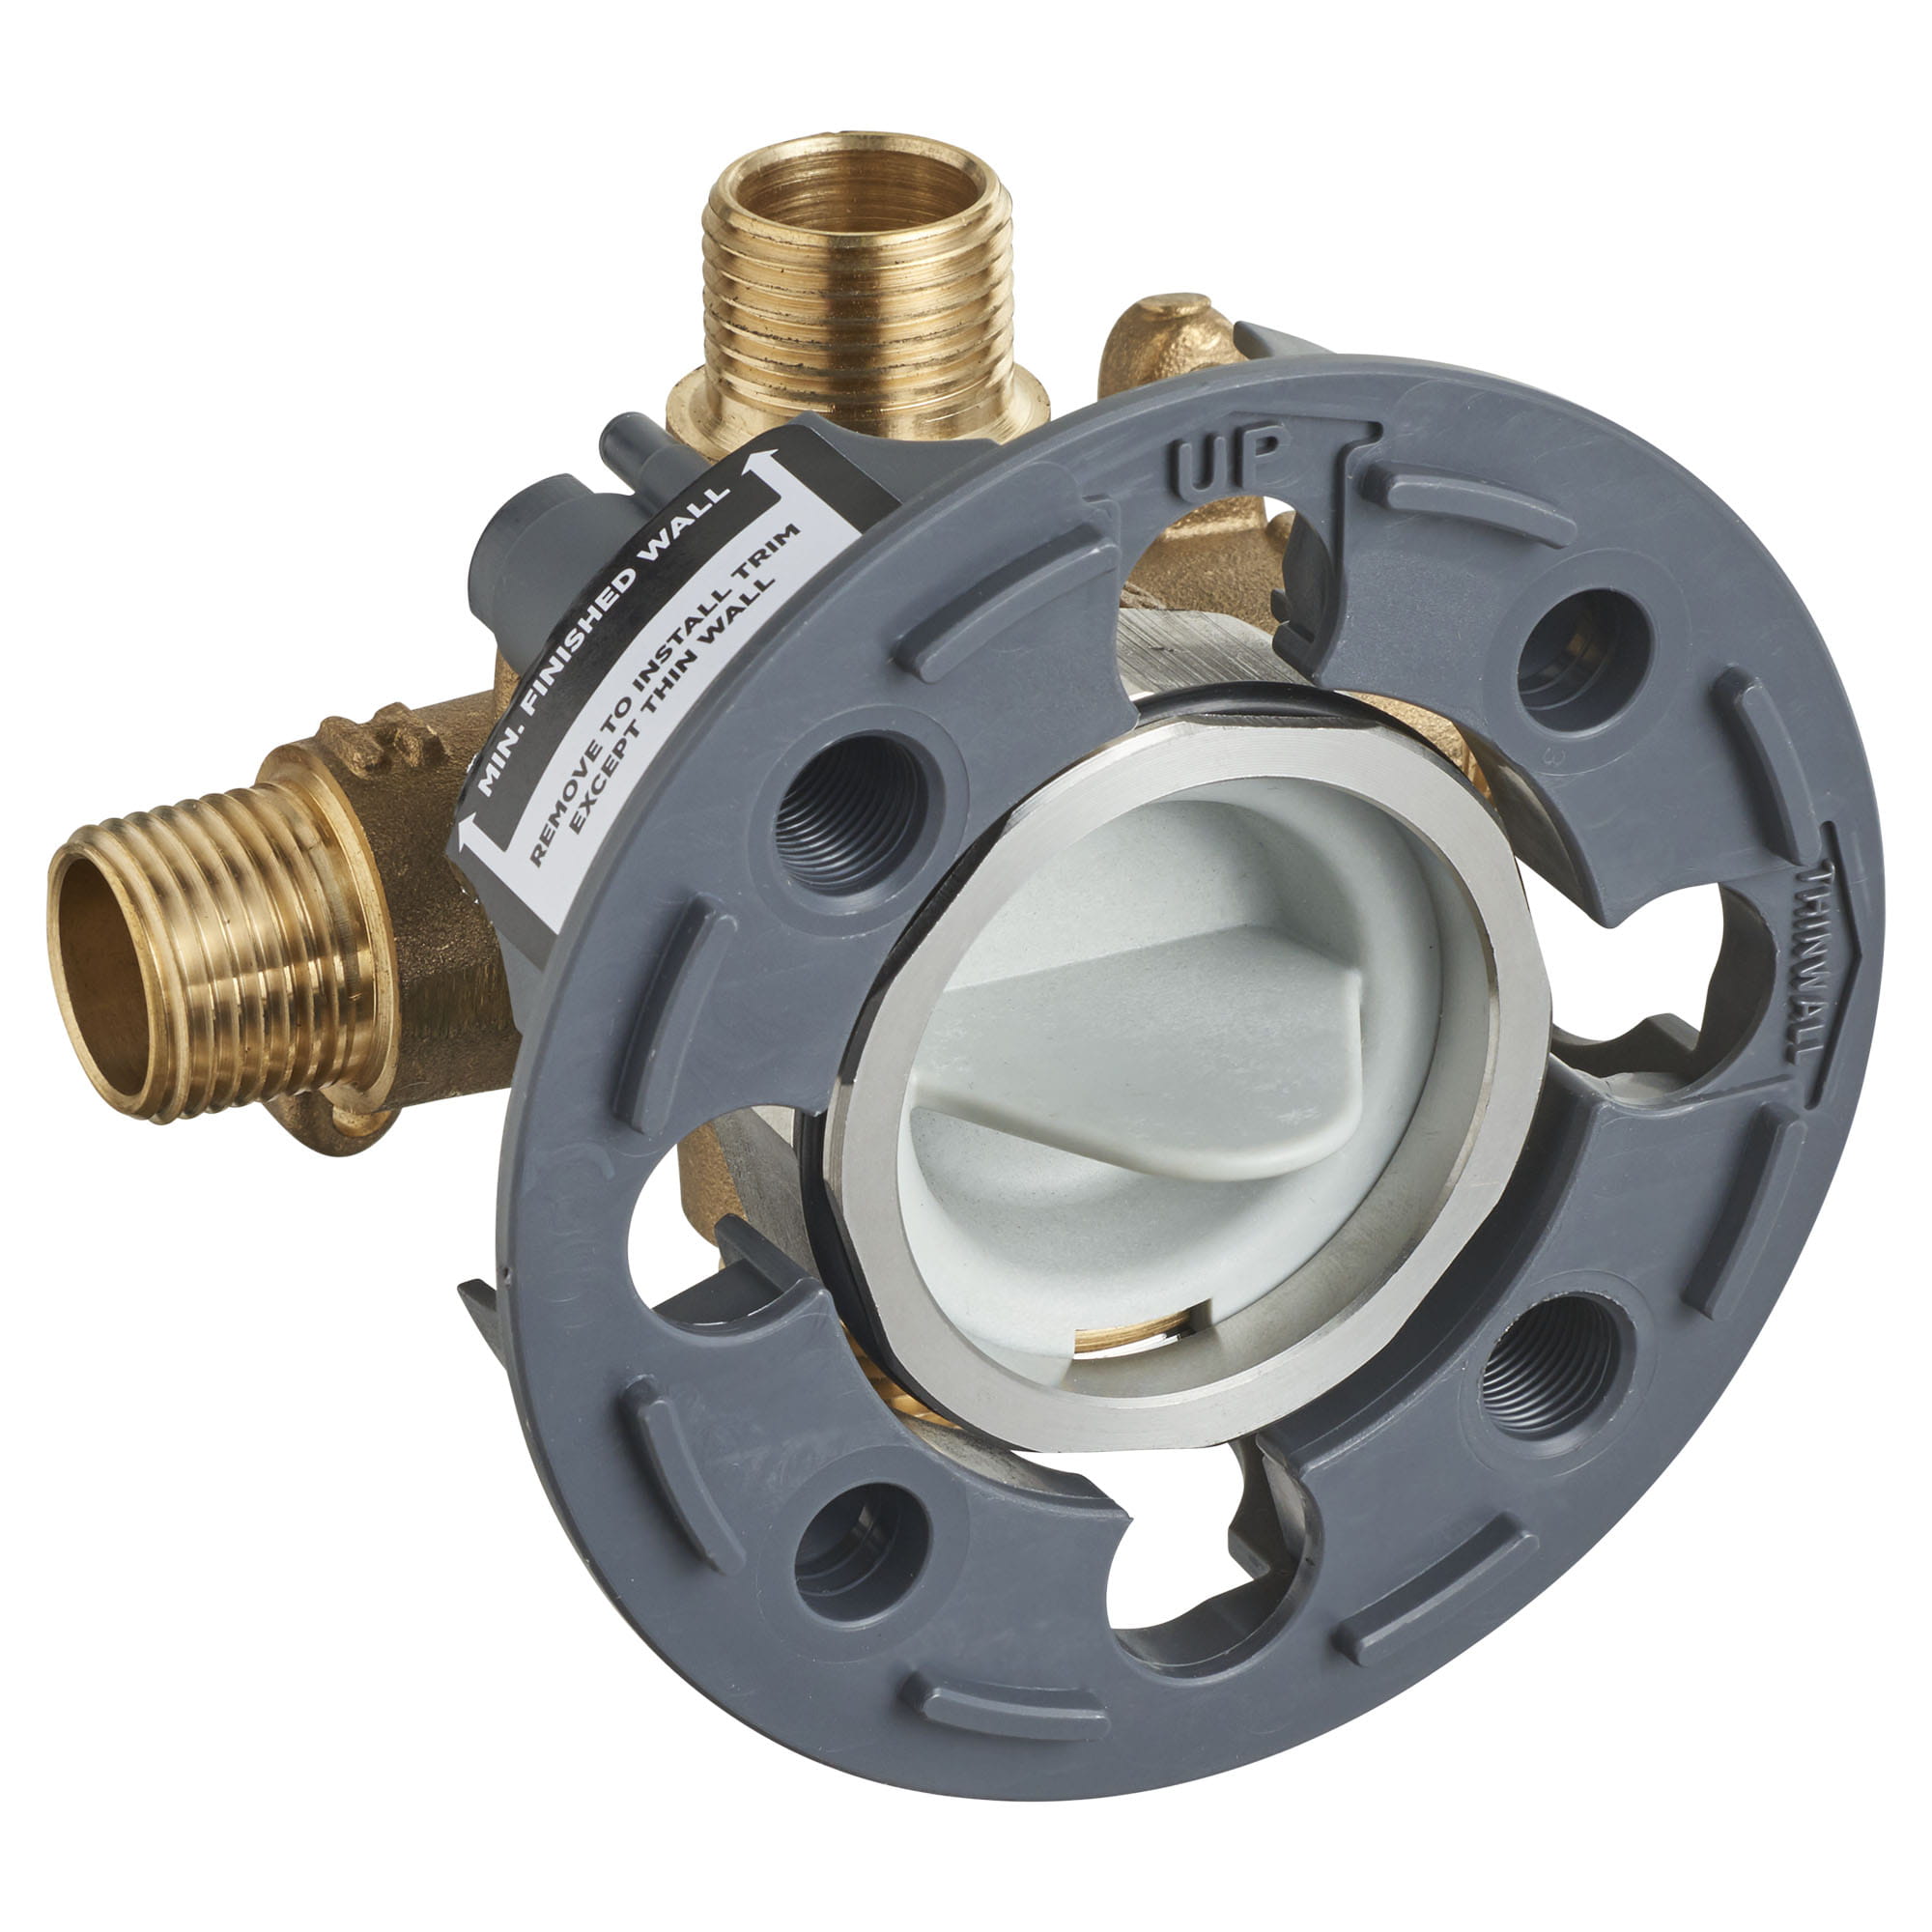 Flash® Shower Rough-In Valve With Universal Inlets/Outlets